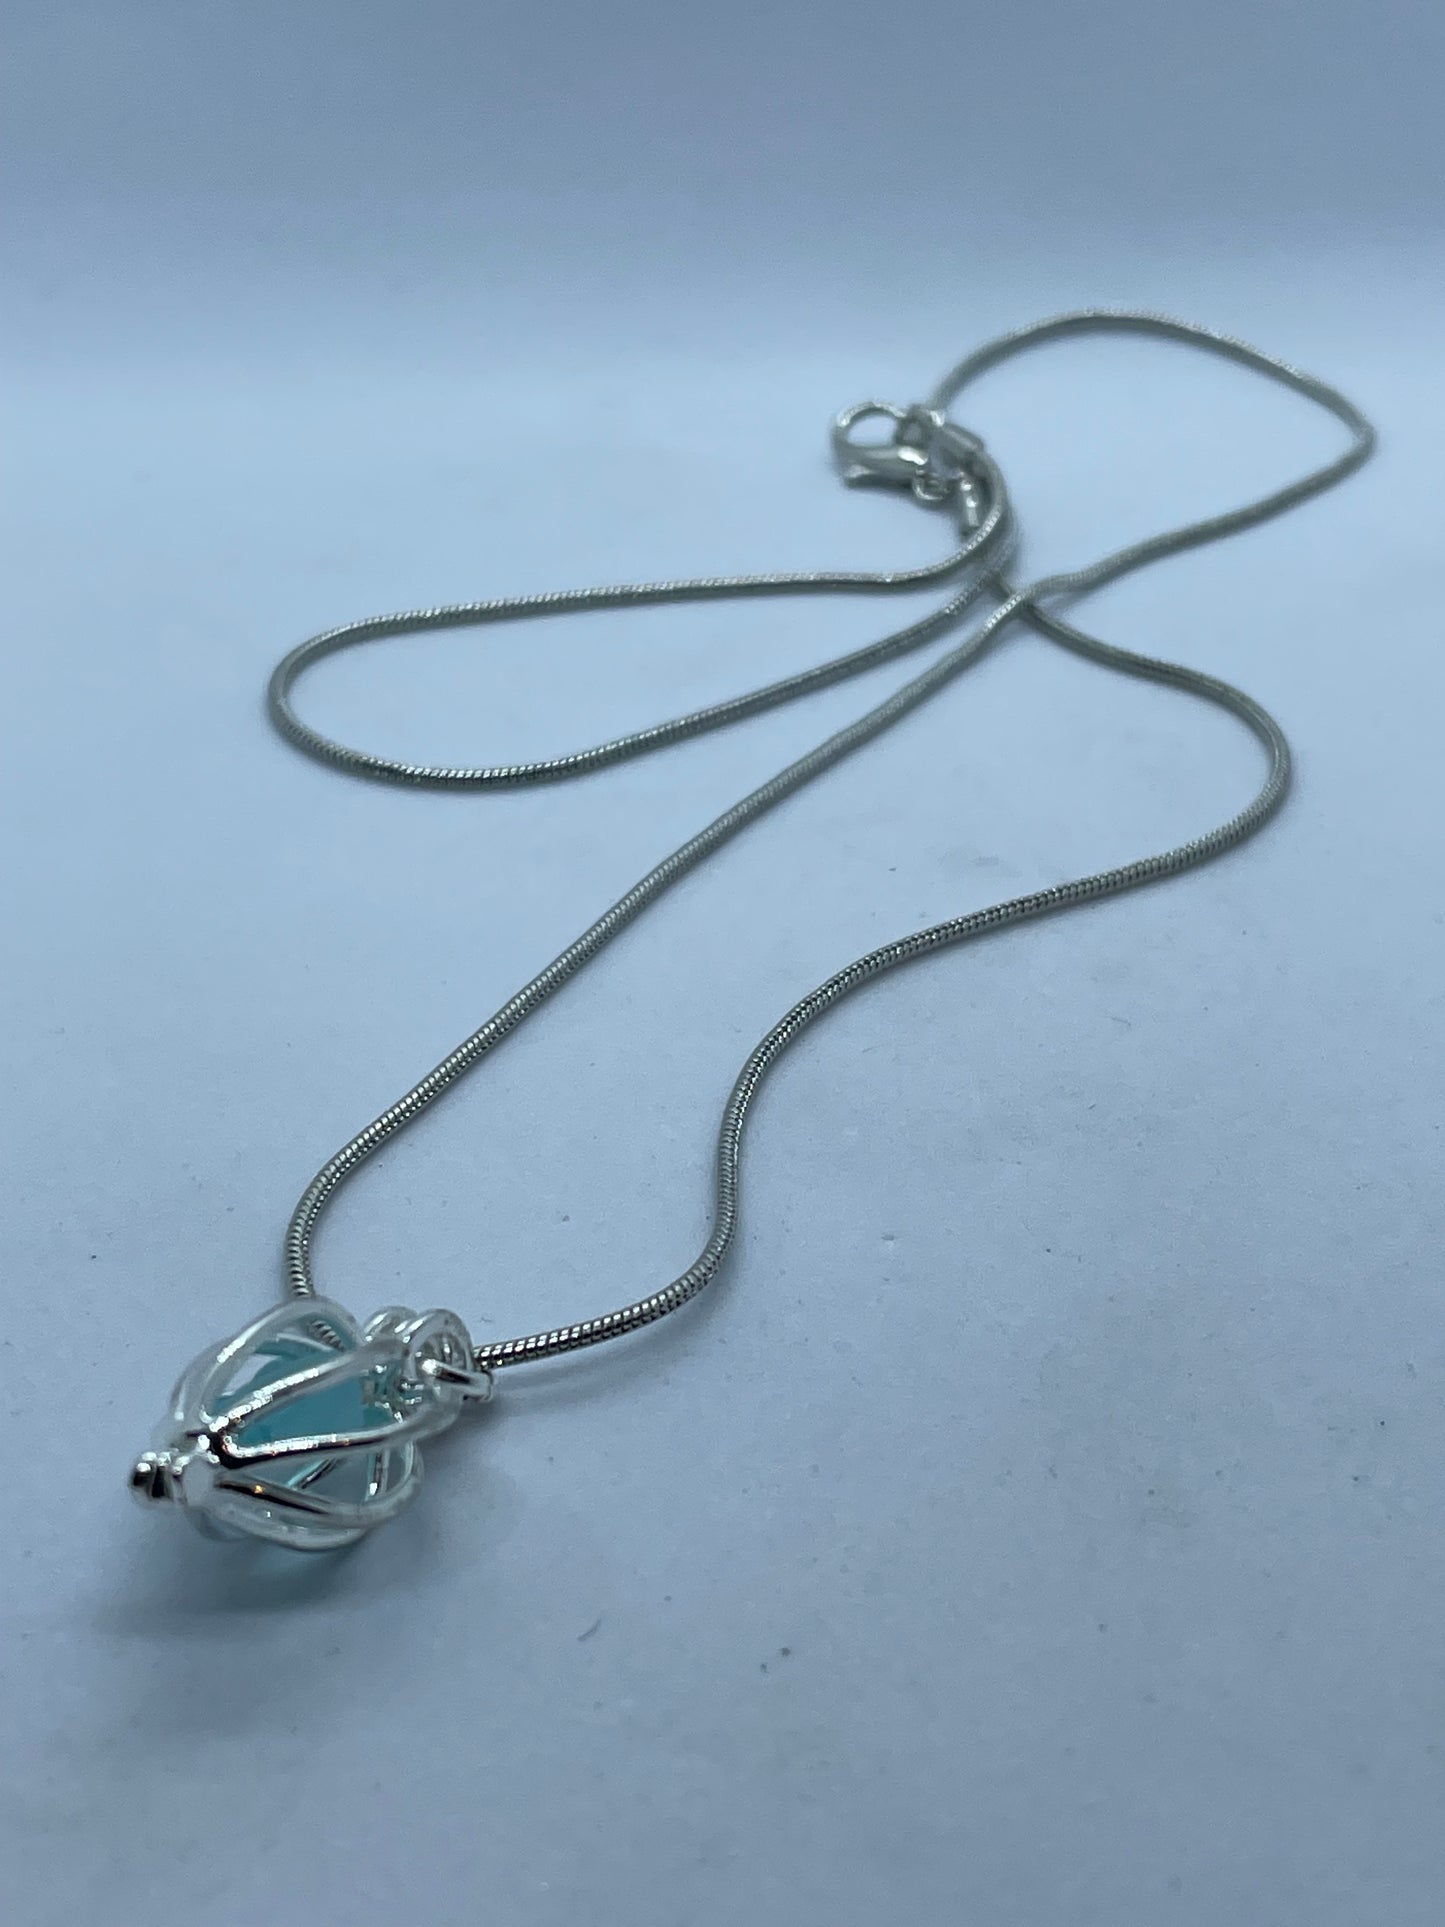 Turquoise Seaglass in silver cage necklace